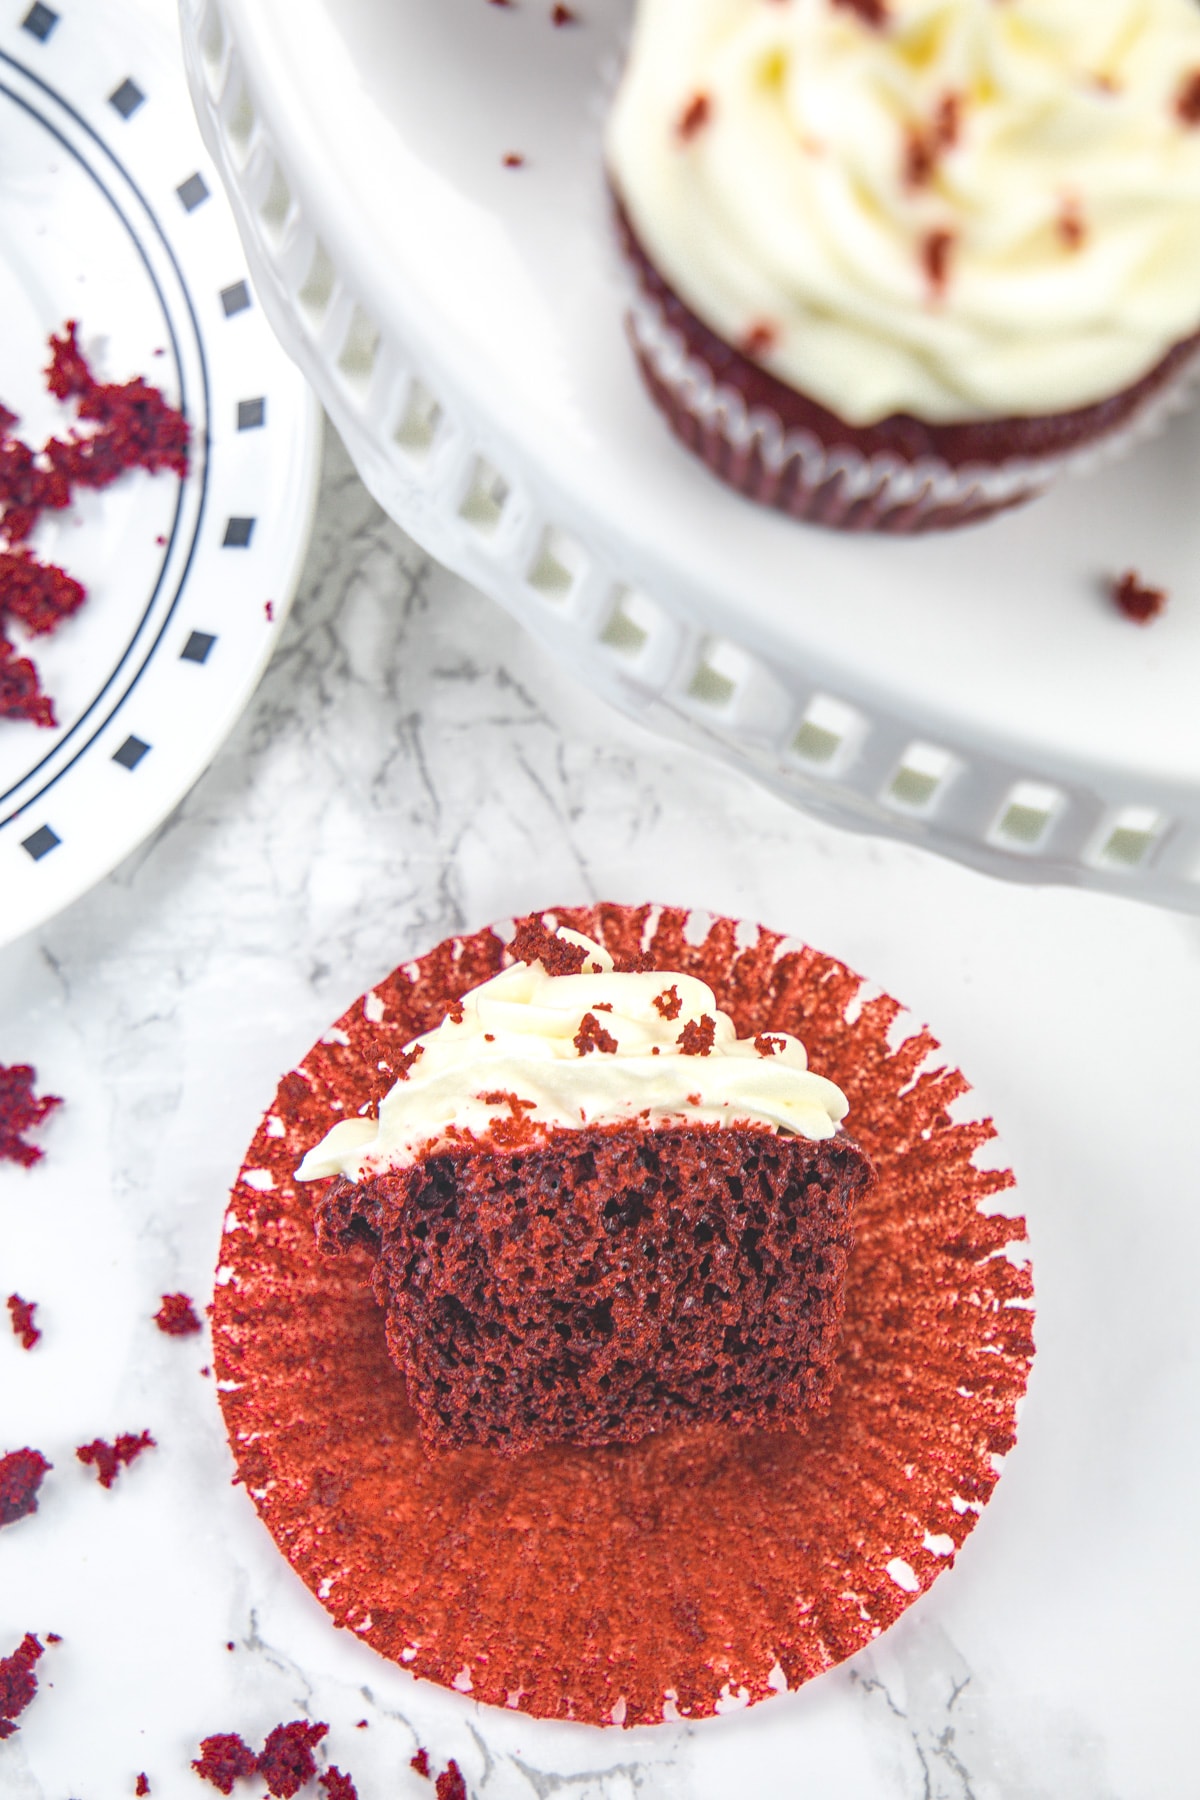 Eggless red velvet cupcake cut into half to show inside texture.